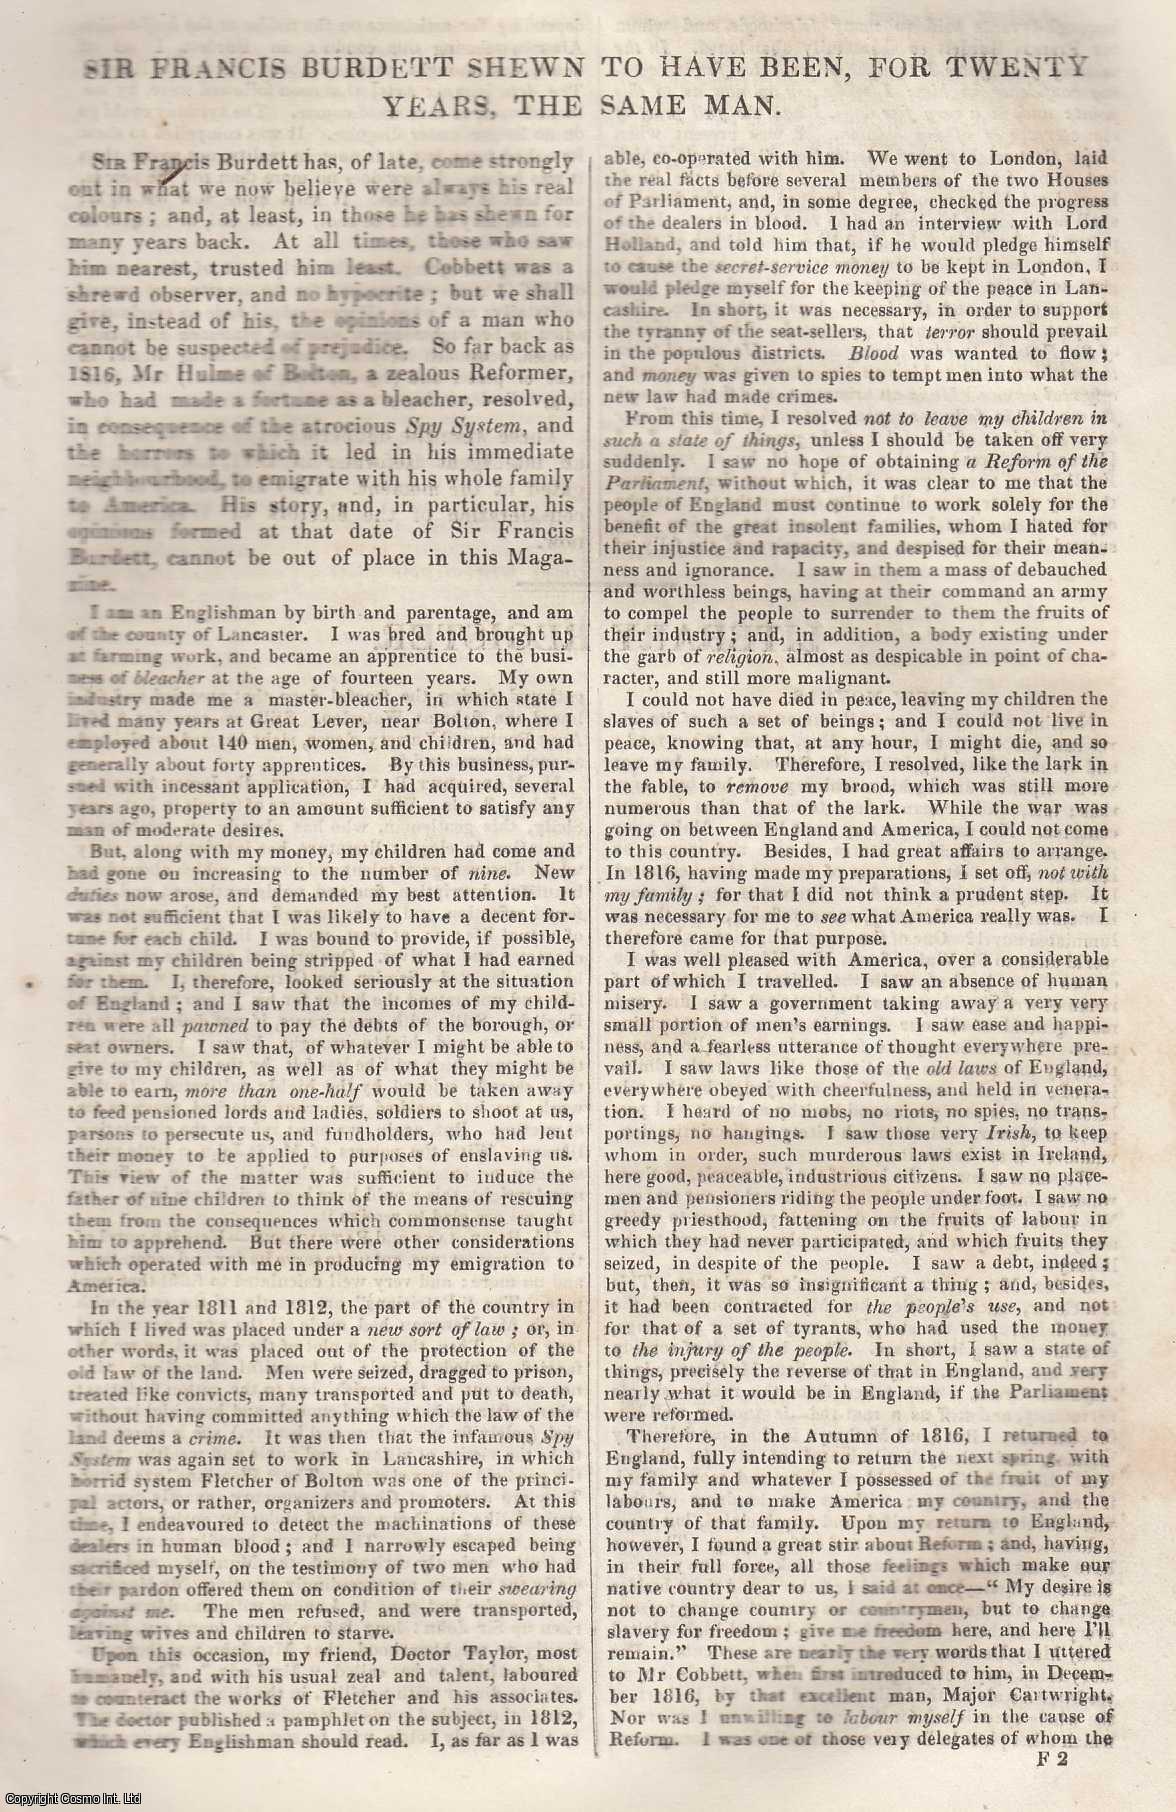 Darling, J. J. - Sir Francis Burdett Shown to Have Been, For Twenty Years, The Same Man. An original article from Tait's Edinburgh Magazine, 1836.